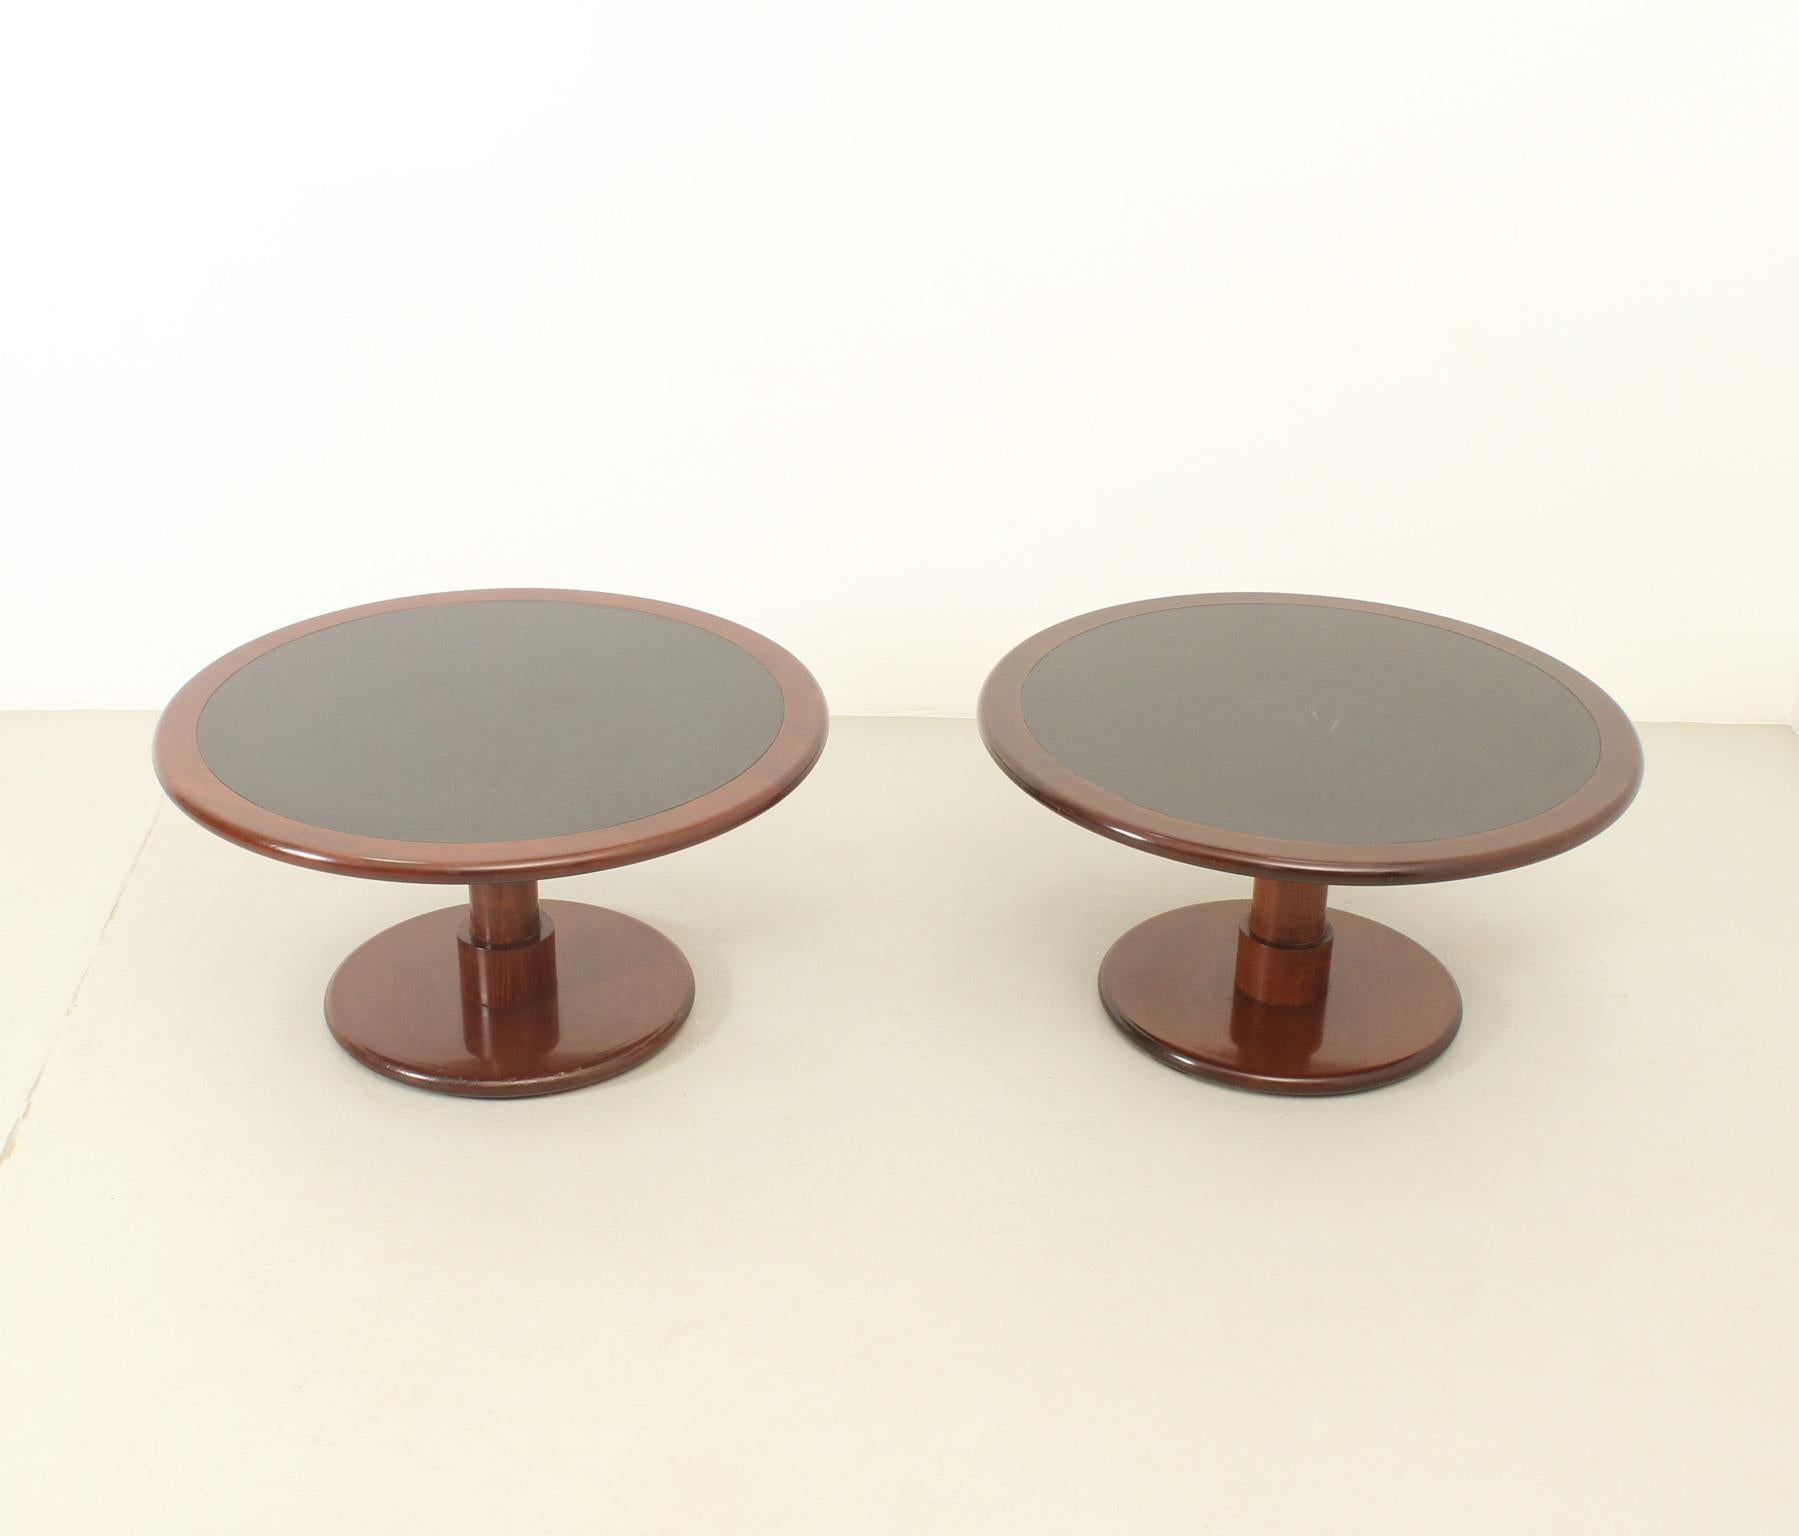 Mid-Century Modern Pair of Coffee or Side Tables by Spanish Architects Correa & Milá, 1960's For Sale